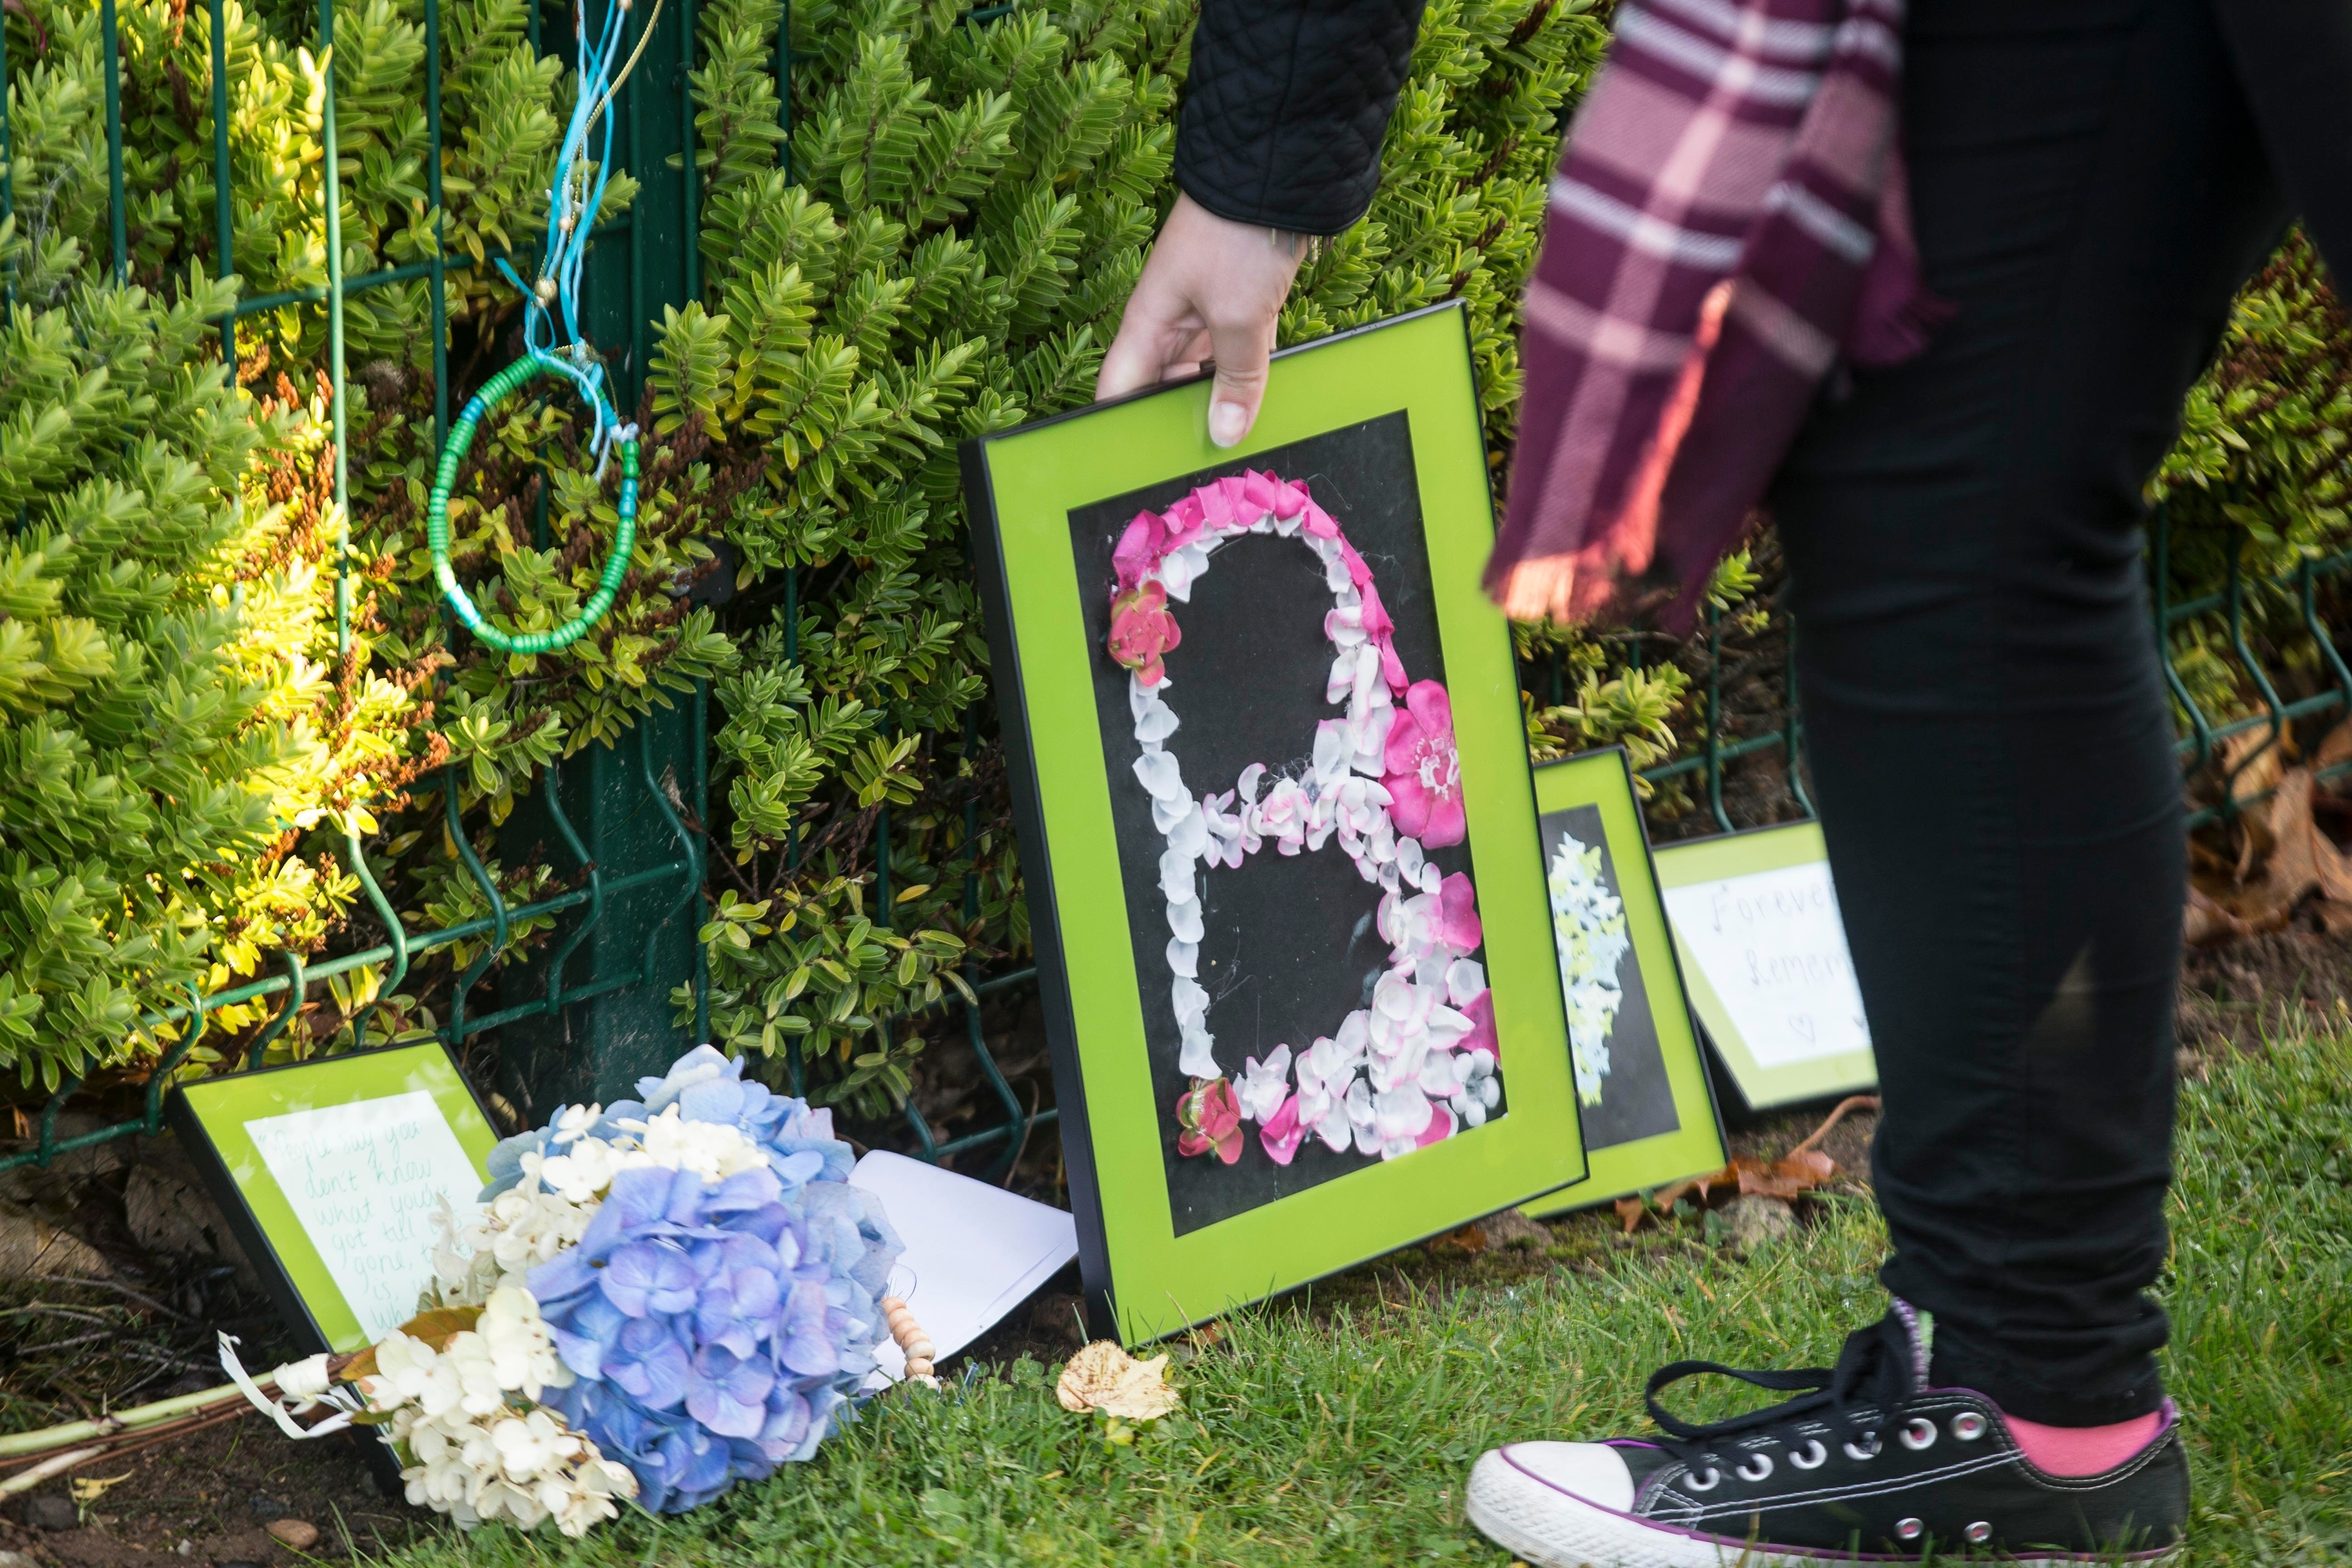 PUPIL STABBED IN SCOTTISH SCHOOL ...  PICTURE OF POLICE AT CULTS ACADEMY IN ABERDEEN WHERE A PUPIL WAS TAKEN TO HOSPITALTHEN DIED. PIC OF FLOWERS LAID BY THE SCHOOL GATES  PIC DEREK IRONSIDE / NEWSLINE MEDIA